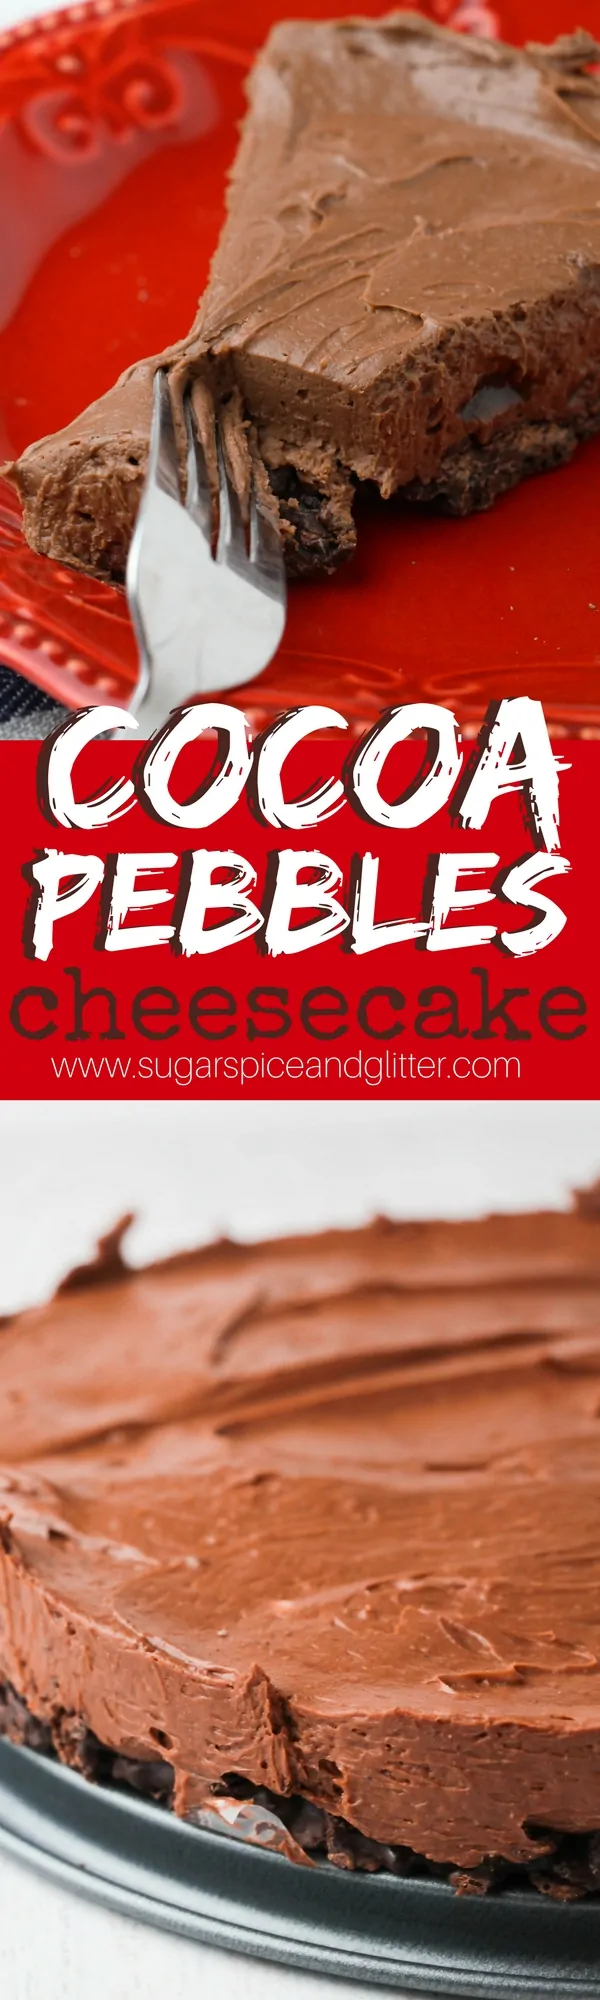 Triple chocolate cocoa pebbles cheesecake recipe - a no-bake chocolate cheesecake with a double chocolate crunch base